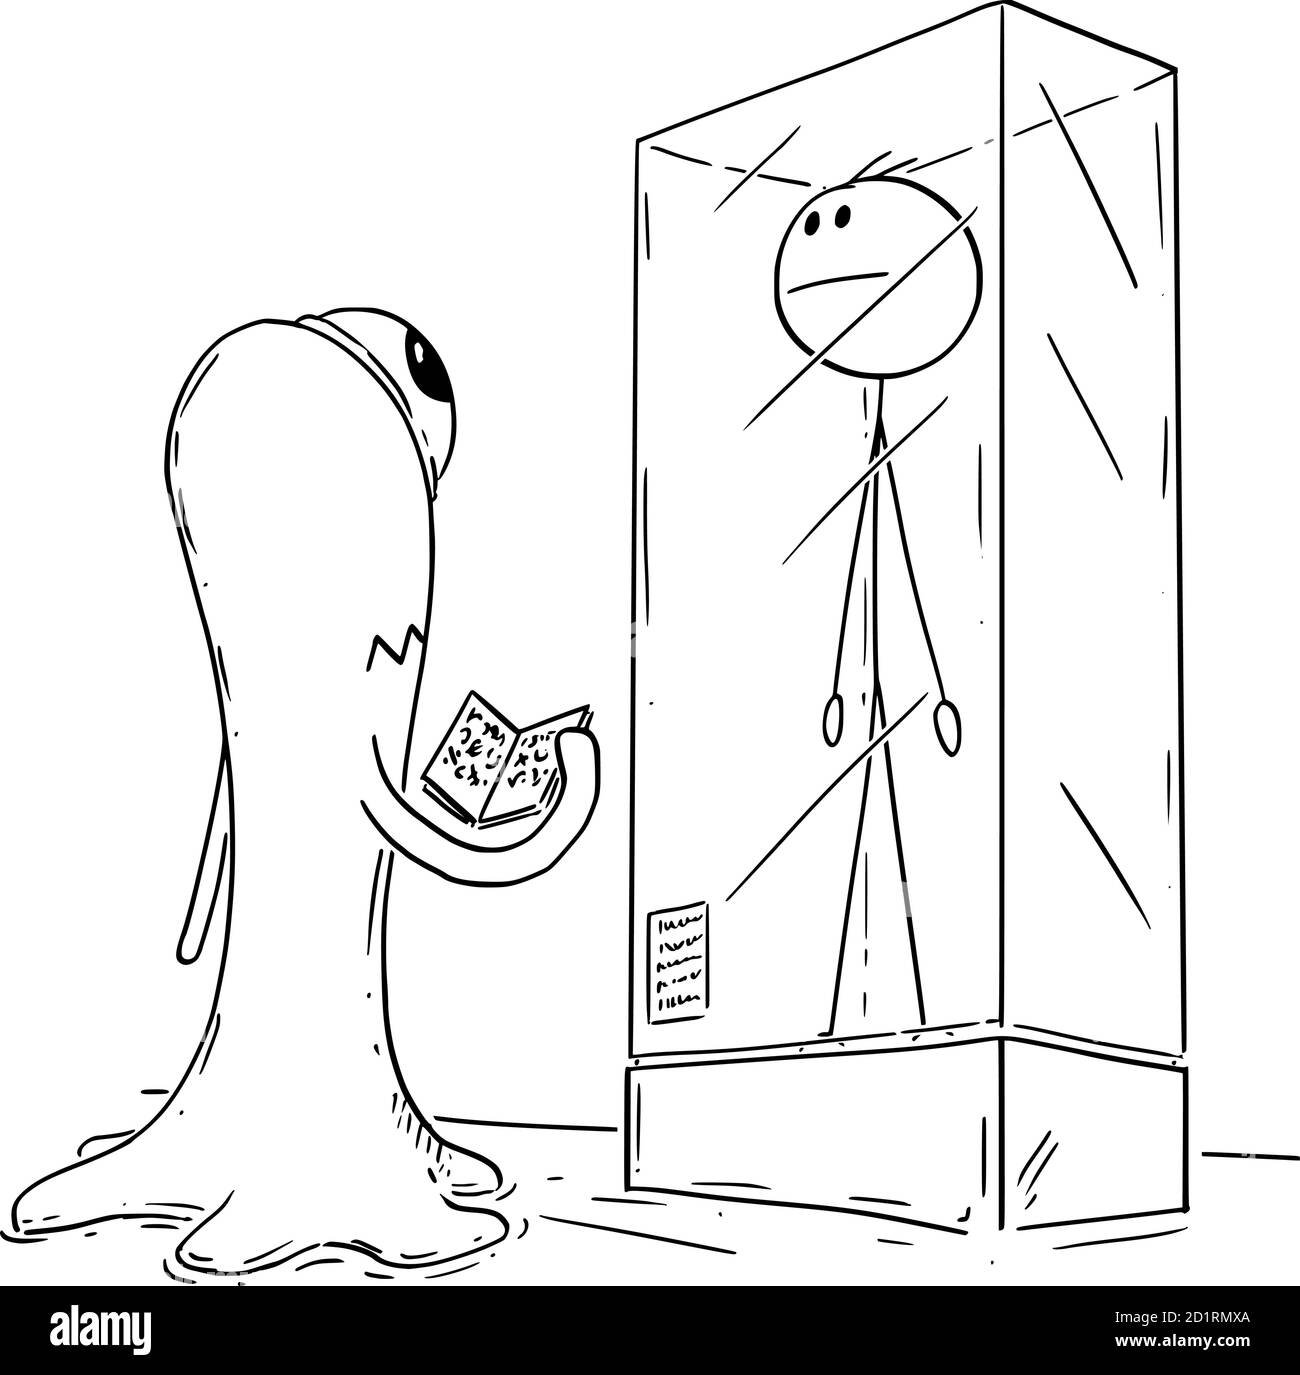 Vector cartoon stick figure drawing conceptual illustration of extinct man or male human being exhibited in museum exposition. Extraterrestrial space alien visitor is watching him. Stock Vector